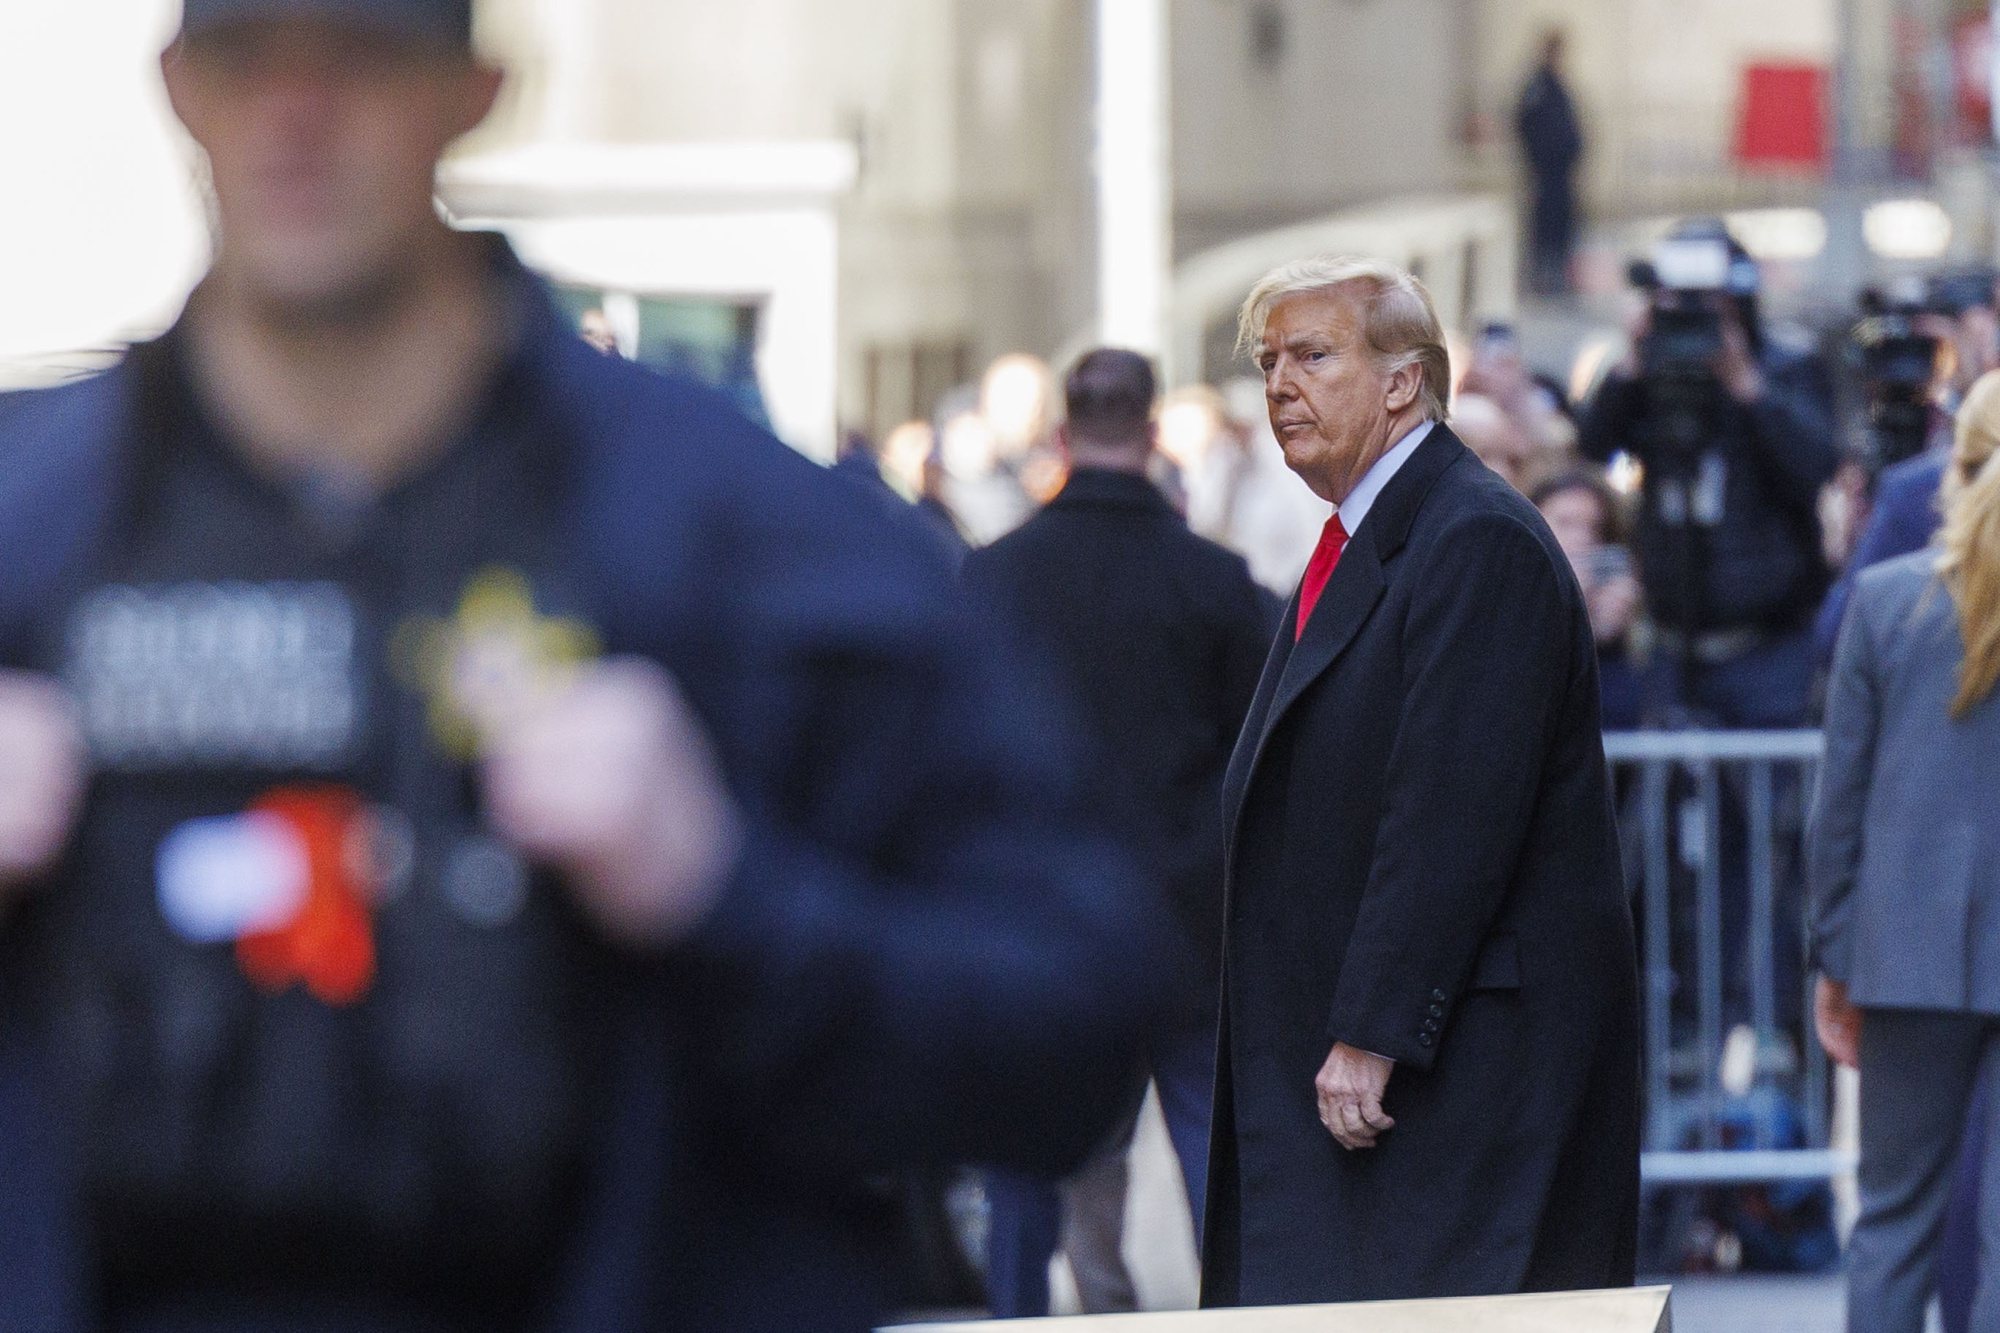 epa11243236 Former US president Donald Trump (C) departs 40 Wall Street after a press conference about his case in criminal court in New York, New York, USA, 25 March 2024. A judge ruled on 25 March that the hush-money trial against former US President Trump will begin on 15 April 2024. Trump is facing 34 felony counts of falsifying business records related to payments made to adult film star Stormy Daniels during his 2016 presidential campaign.  EPA/SARAH YENESEL